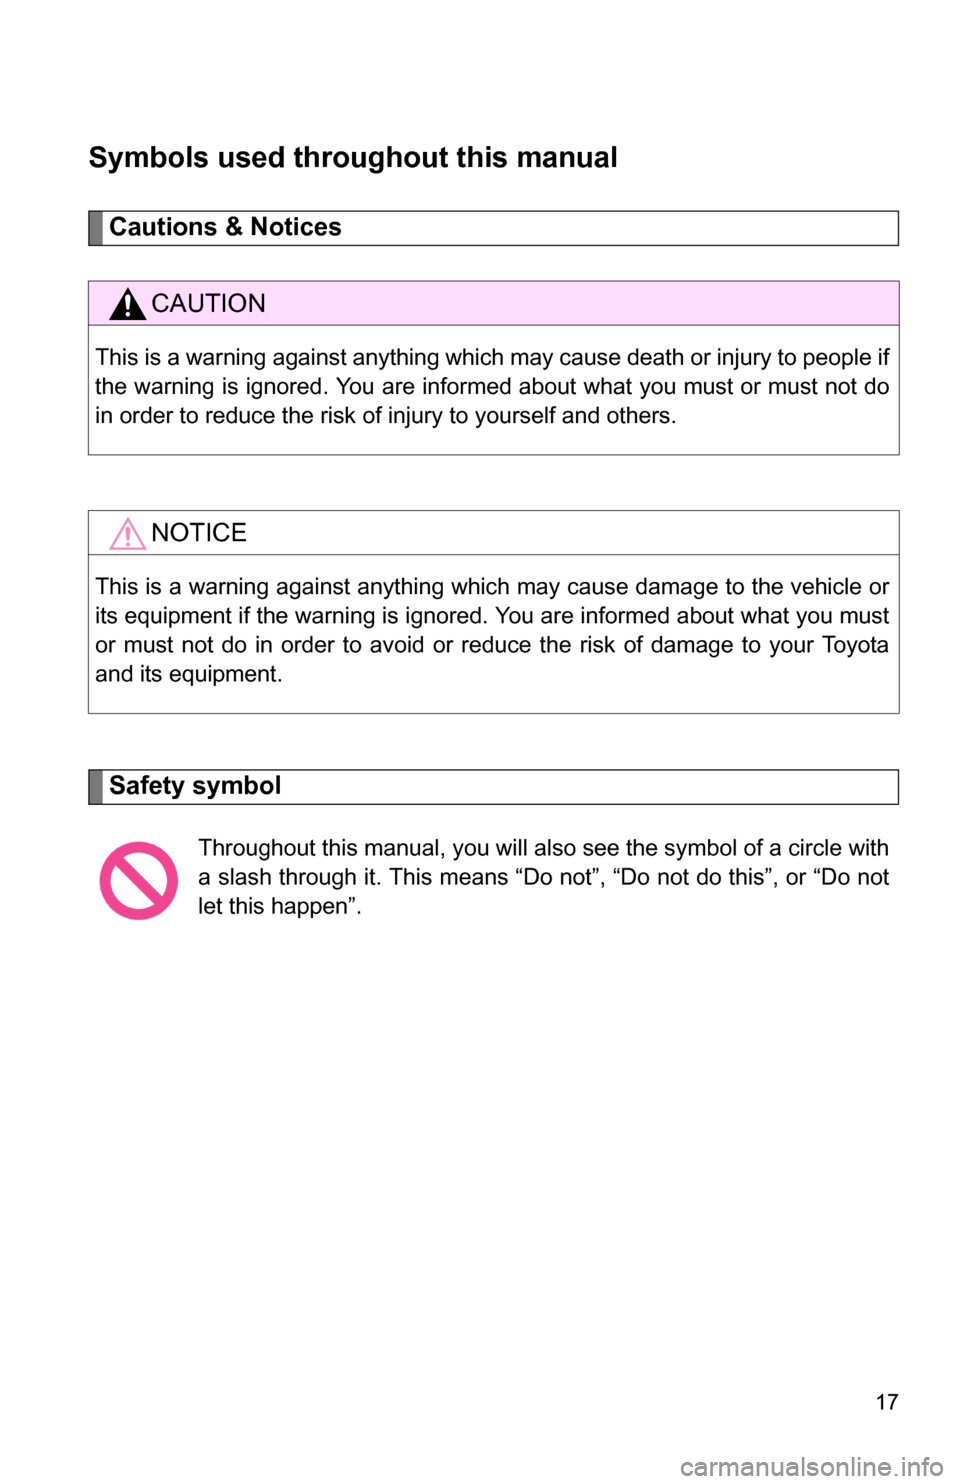 TOYOTA COROLLA 2009 10.G Owners Manual 17
Symbols used throughout this manual
Cautions & Notices 
Safety symbol
CAUTION
This is a warning against anything which may cause death or injury to people if
the warning is ignored. You are informe